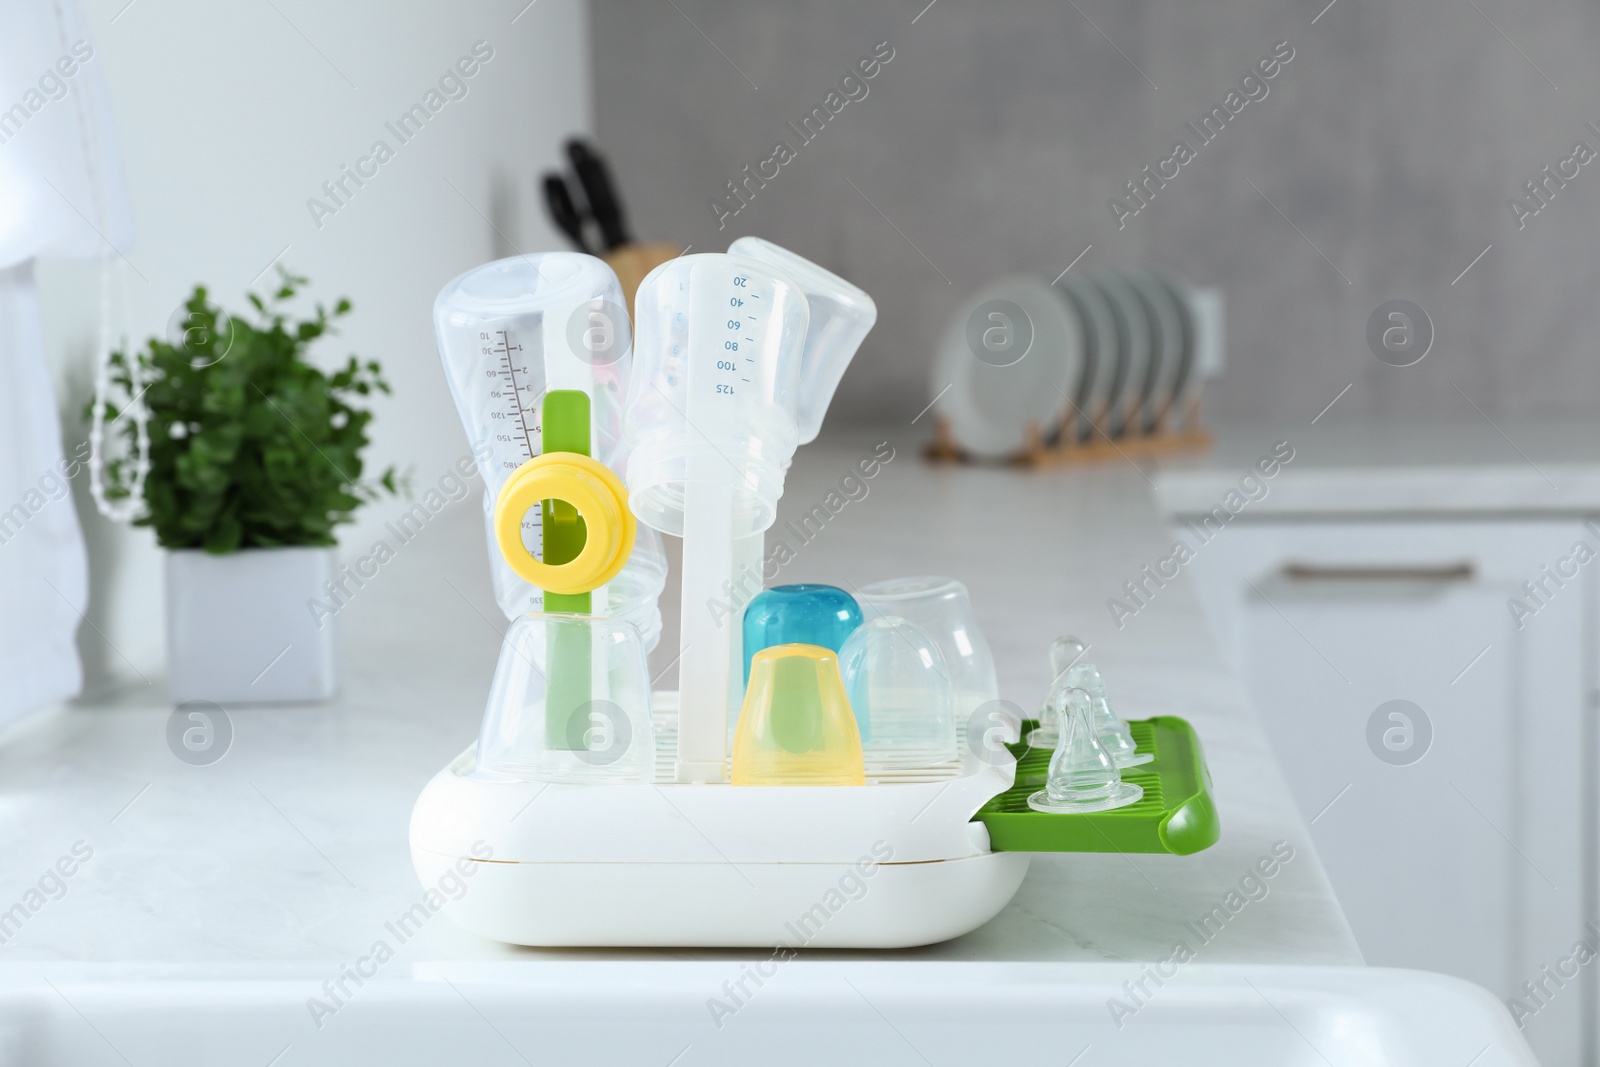 Photo of Dryer with baby bottles and nipples after sterilization on white countertop in kitchen